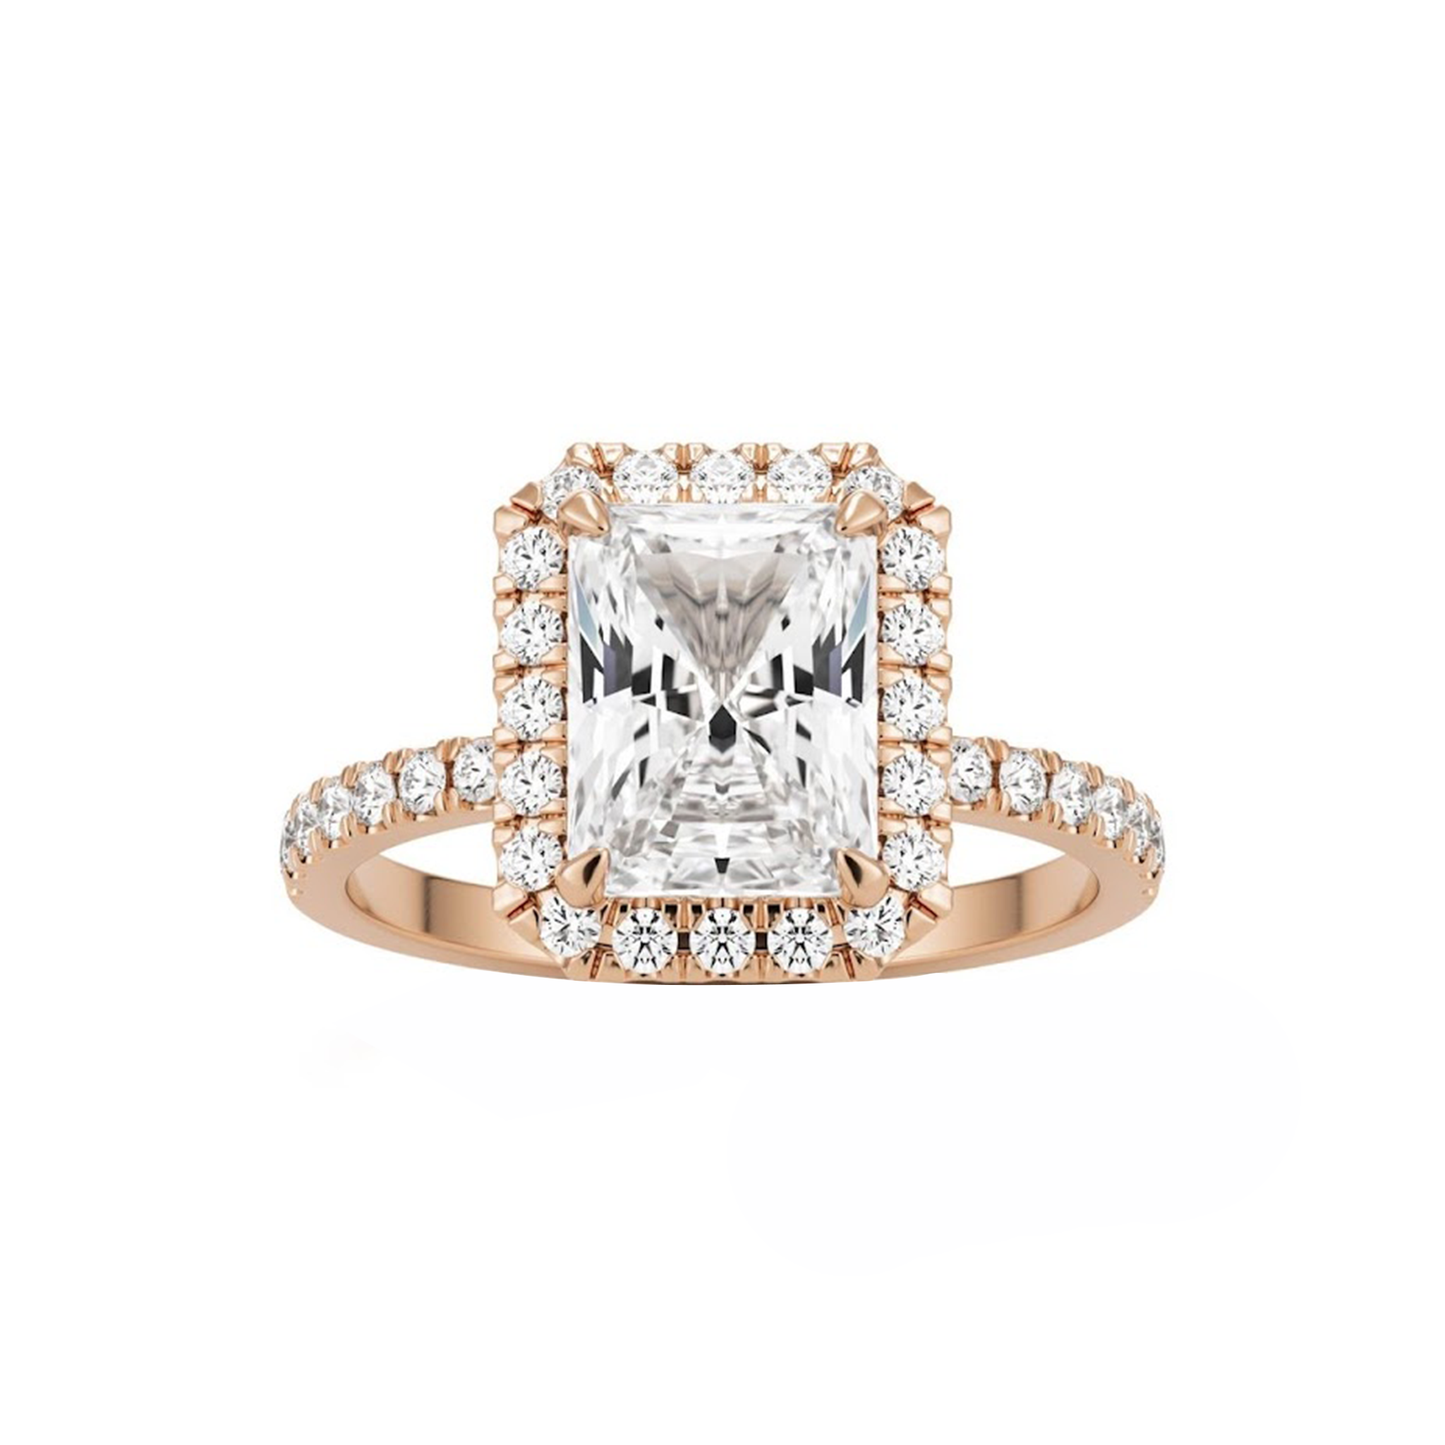 Radiant Diamond Ring With Halo In Pave Setting